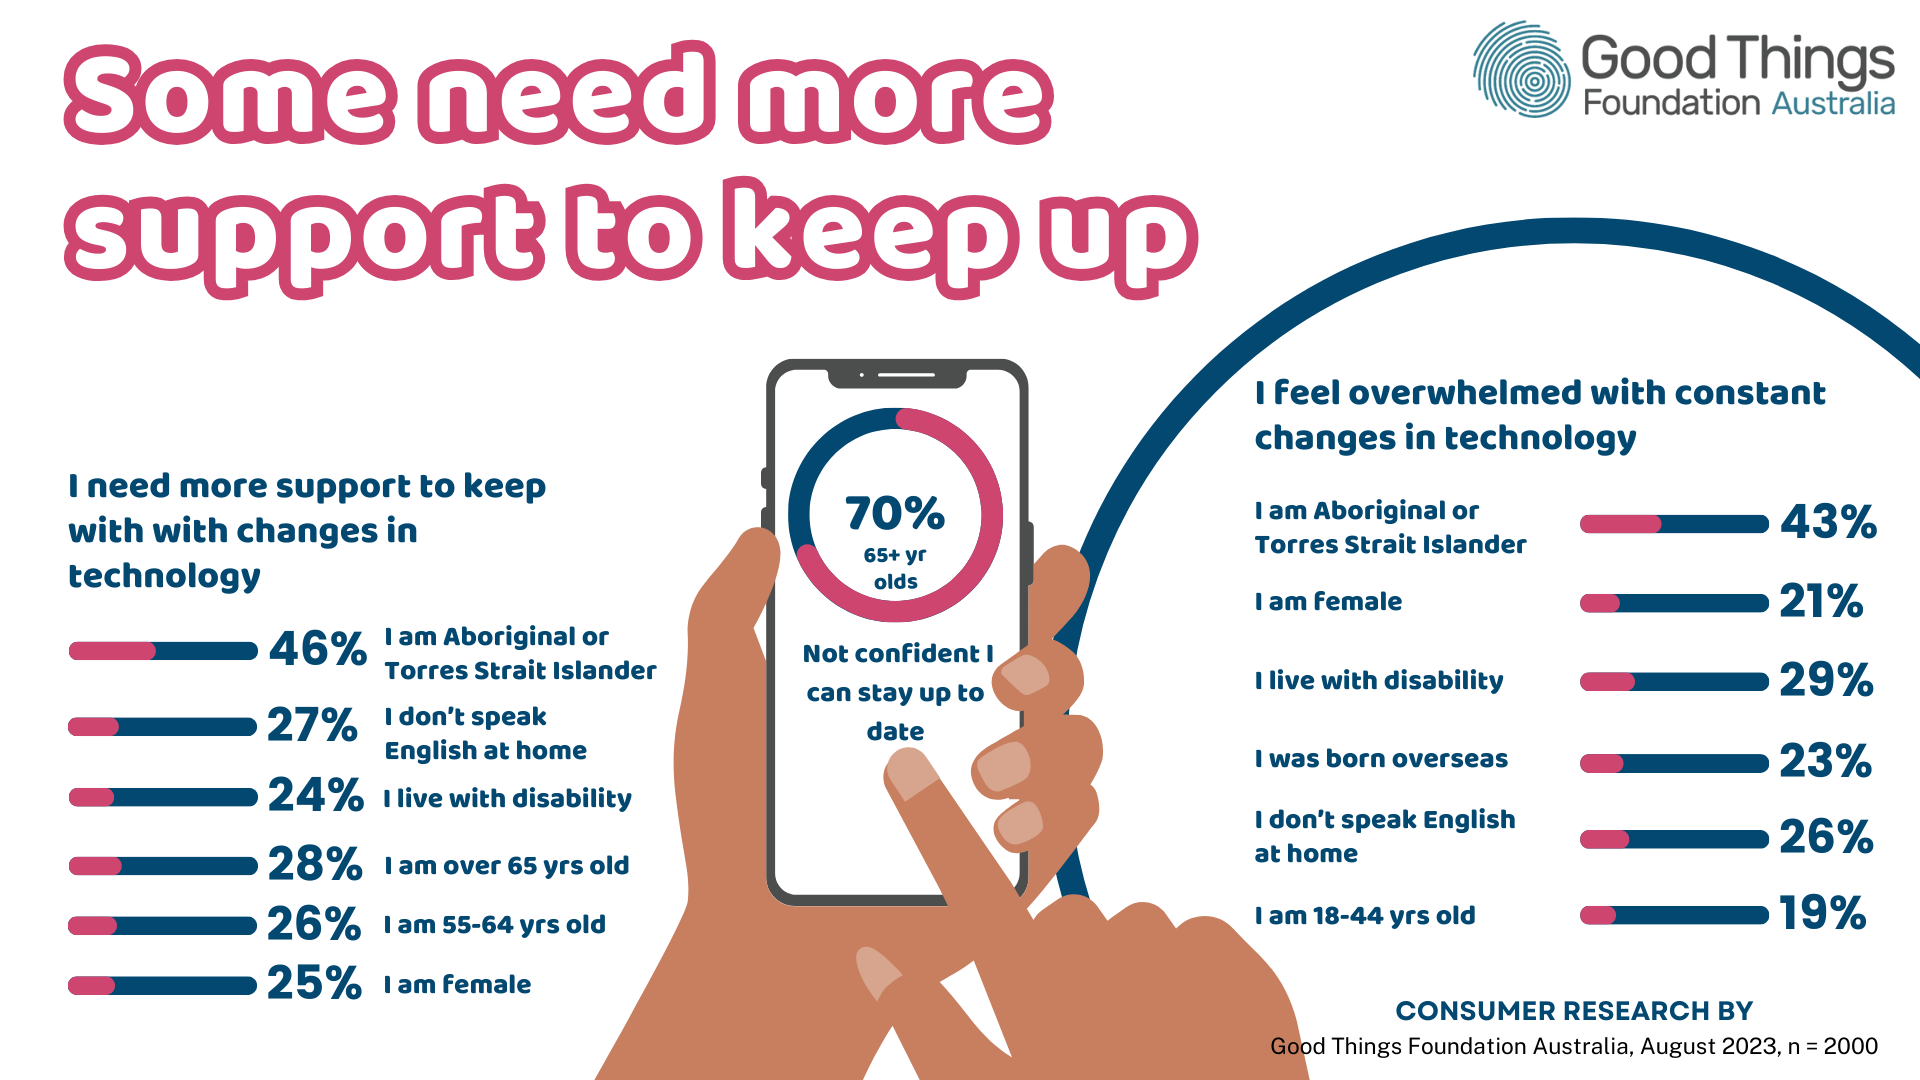 Some need more support to keep up infographic I need more support to keep with with changes in technology: 46% I am Aboriginal or Torres Strait Islander 27% I don’t speak English at home 24% I live with disability 28% I am over 65 yrs old 26% I am 55-64 yrs old 25% I am female 70% 65+ year olds Not confident I can stay up to date I feel overwhelmed with constant changes in technology: 43% I am Aboriginal or Torres Strait Islander 21% I am female 29% I live with disability 23% I was born overseas 26% I don’t speak English at home 19% I am 18-44 yrs old